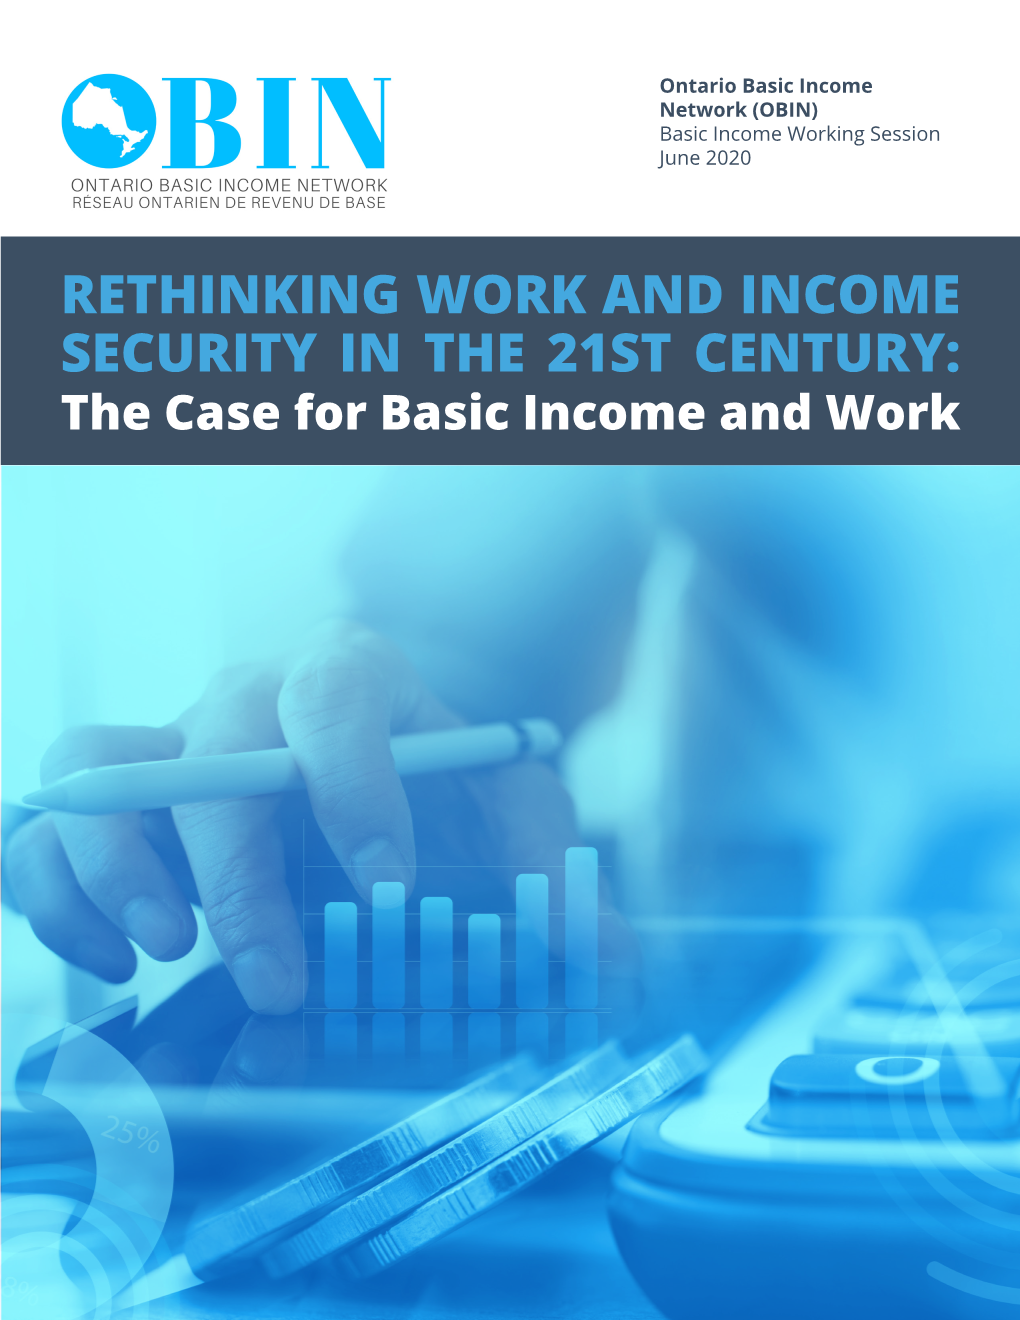 RETHINKING WORK and INCOME SECURITY in the 21ST CENTURY: the Case for Basic Income and Work